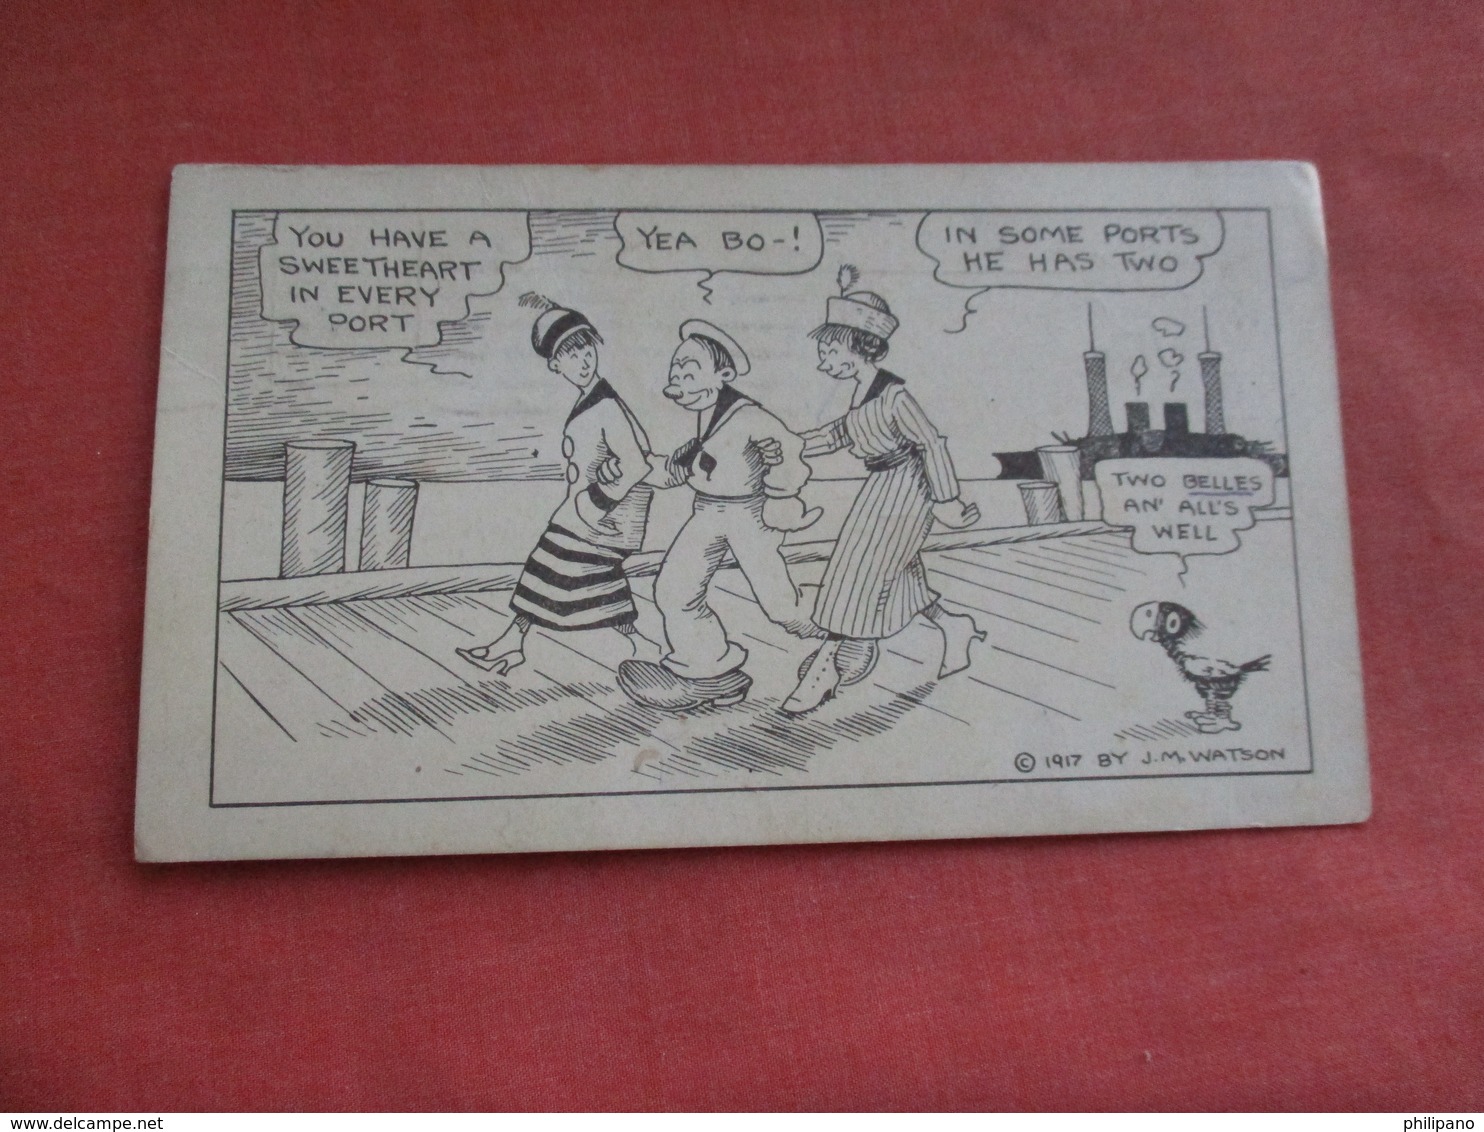 Signed Watson Navy Humour  2 Girls In Every Port - Stamp Peeled Off Back  Ref 3107 - Humour